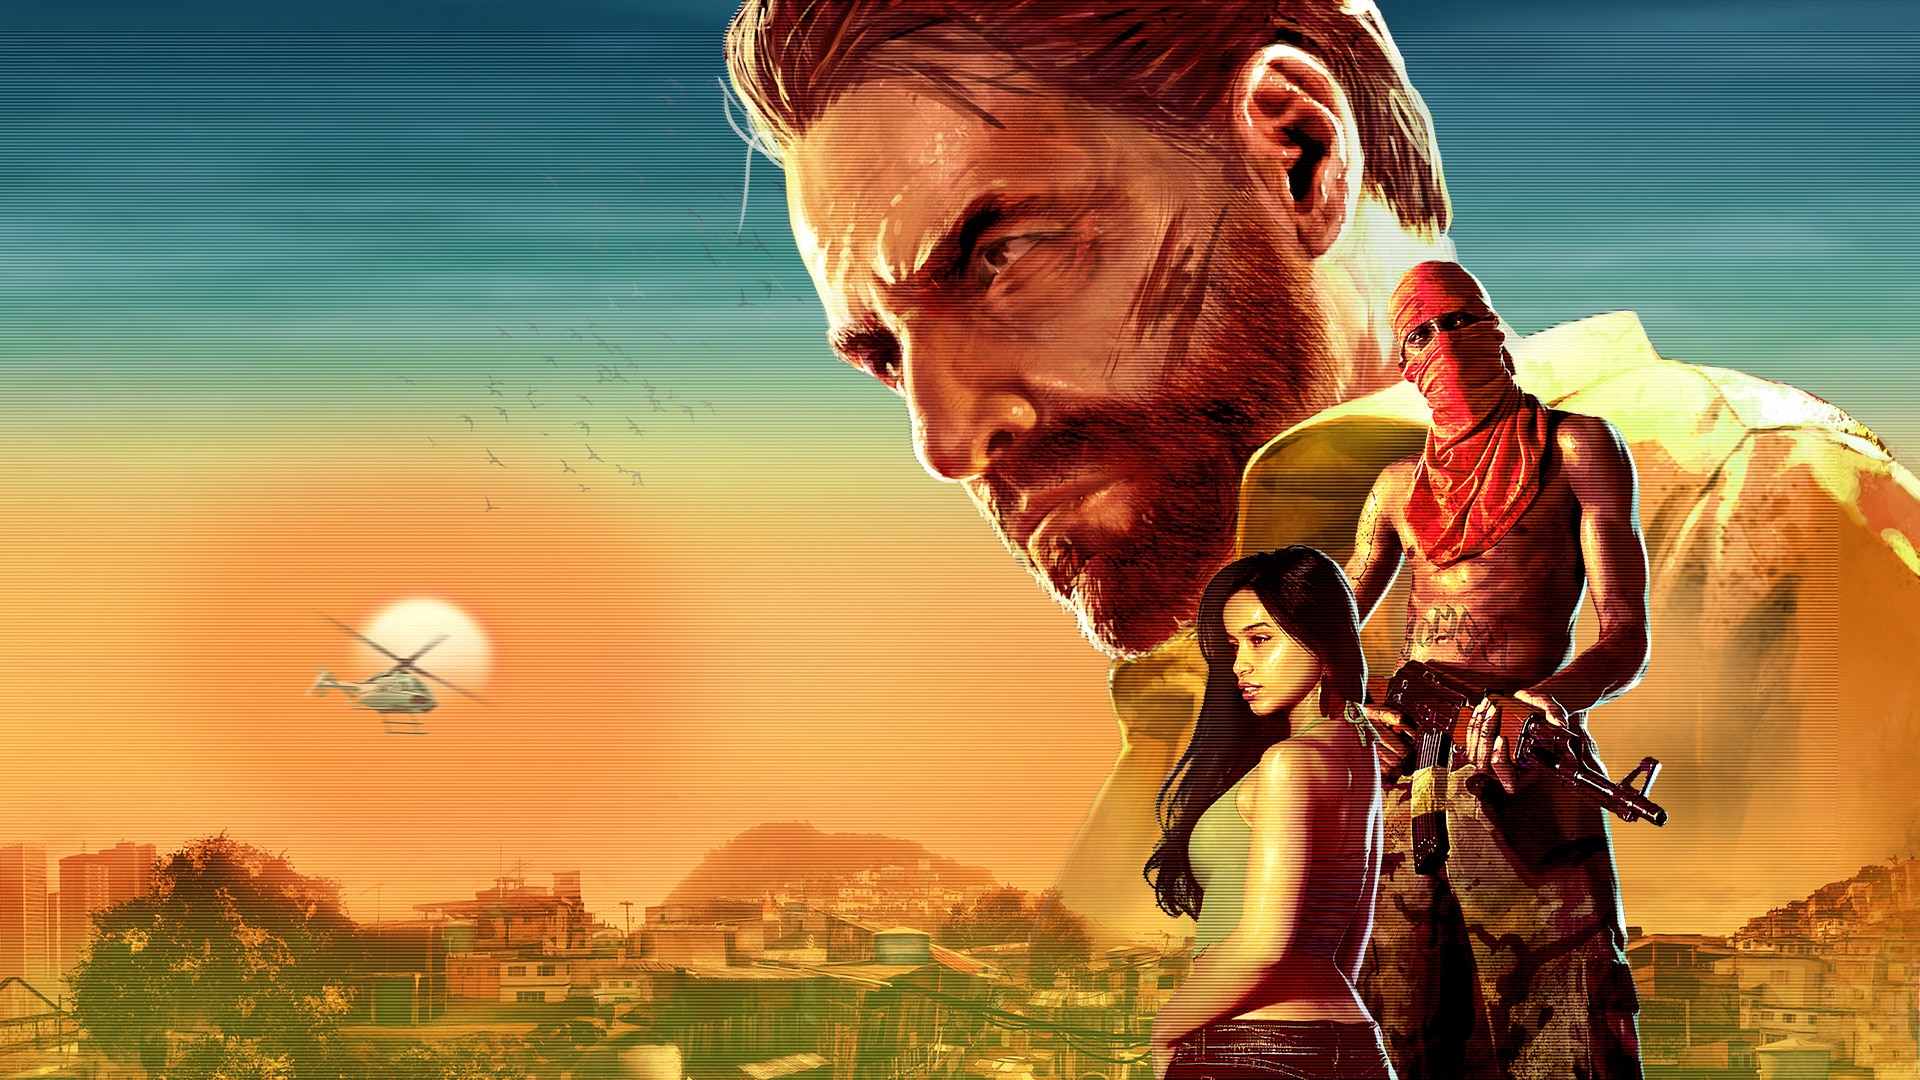 The Anniversary Edition of the Max Payne 3 soundtrack vinyl thumbnail is out